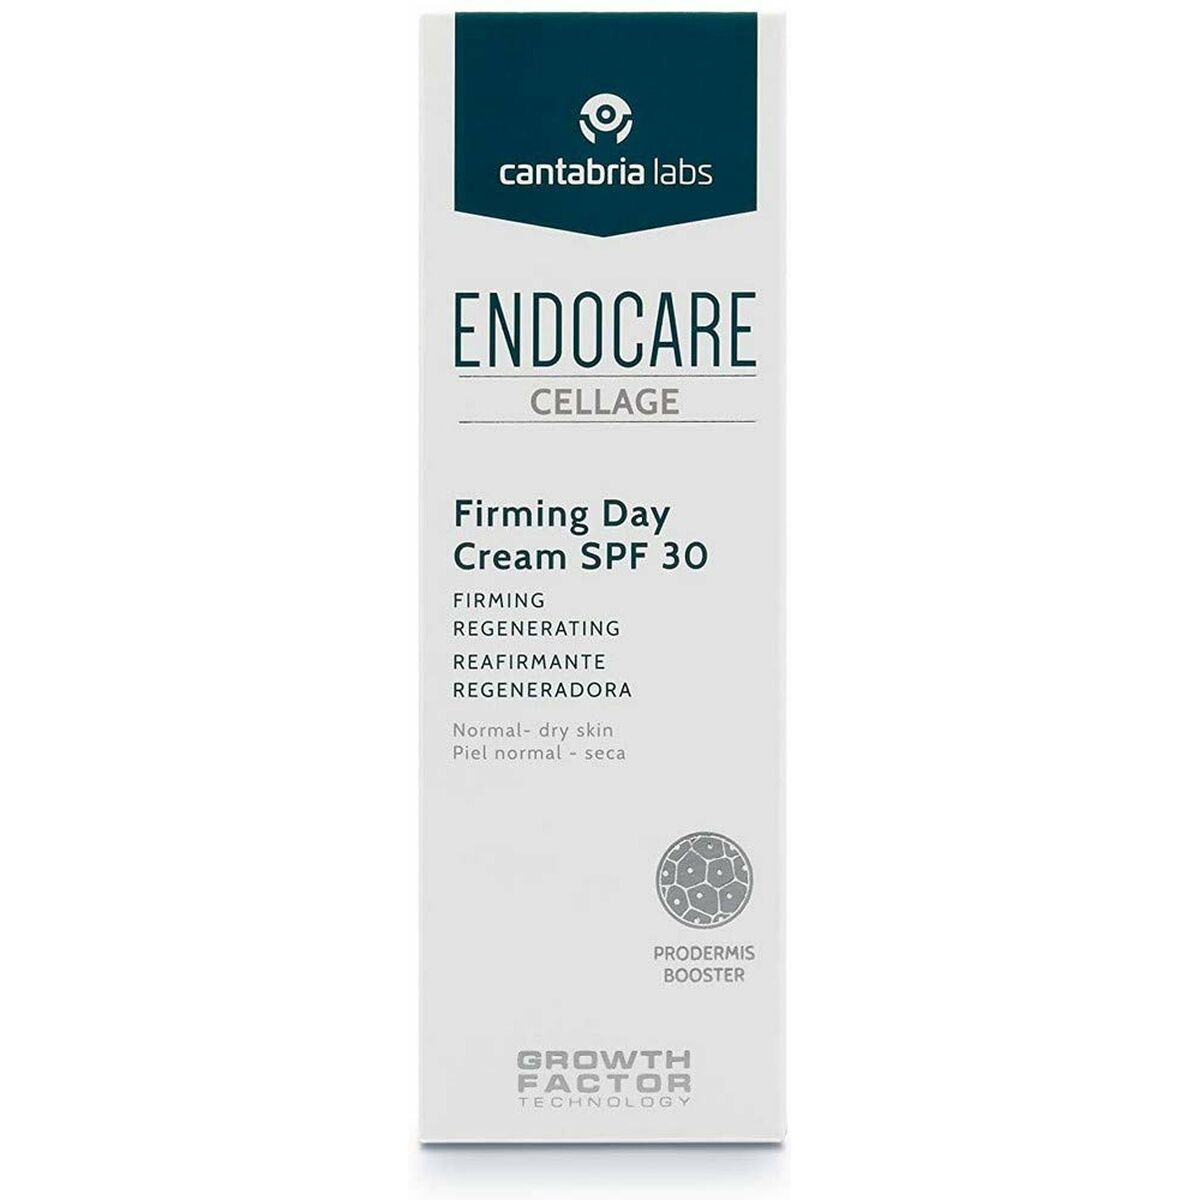 Firming Cream Endocare Cellage Spf 30+ 50 ml | Endocare | Aylal Beauty